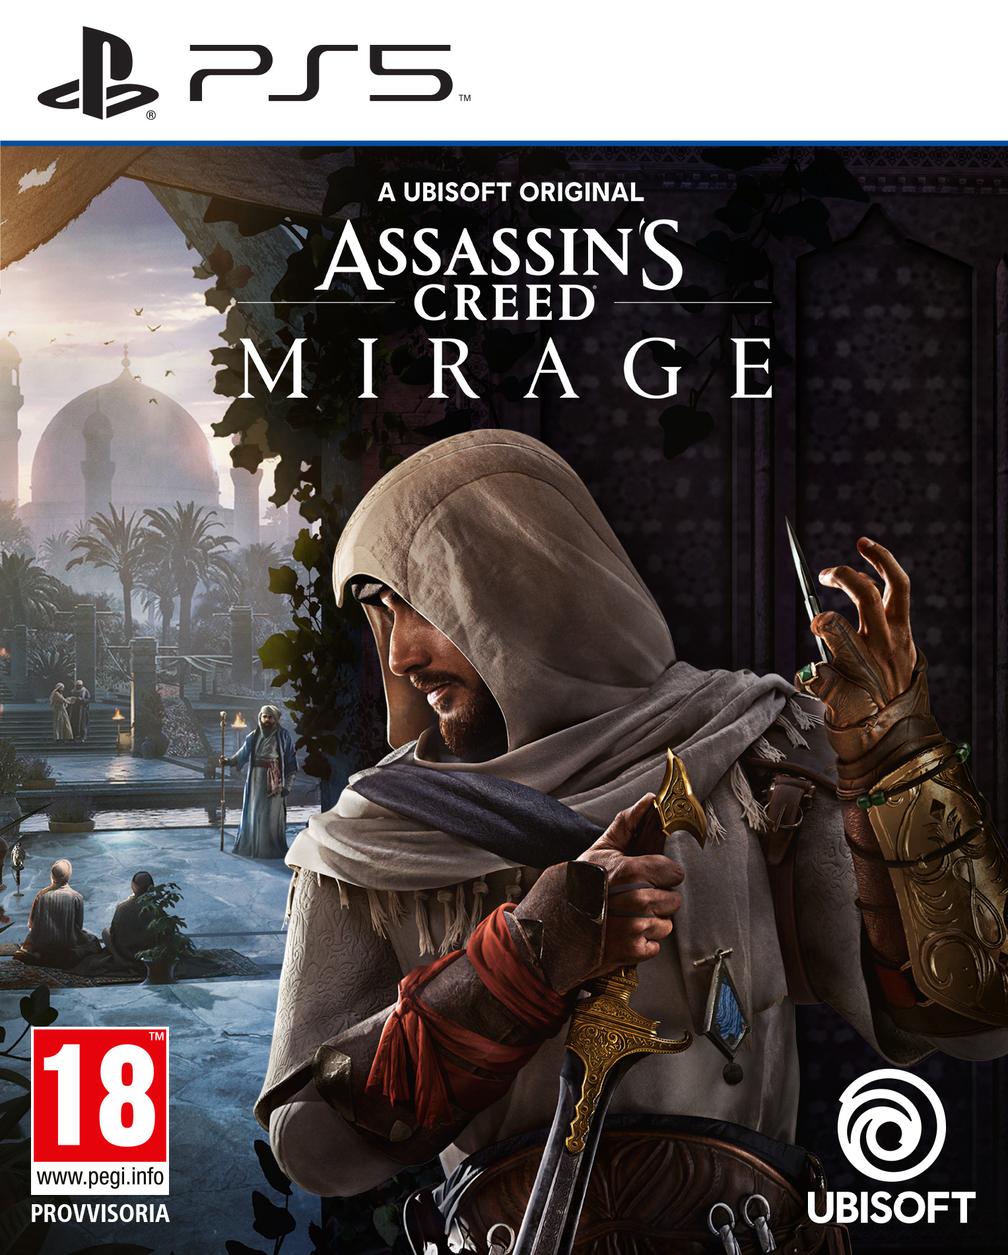 Offerta per Ubisoft - Assassin's Creed Mirage PS5 a 29,99€ in Comet